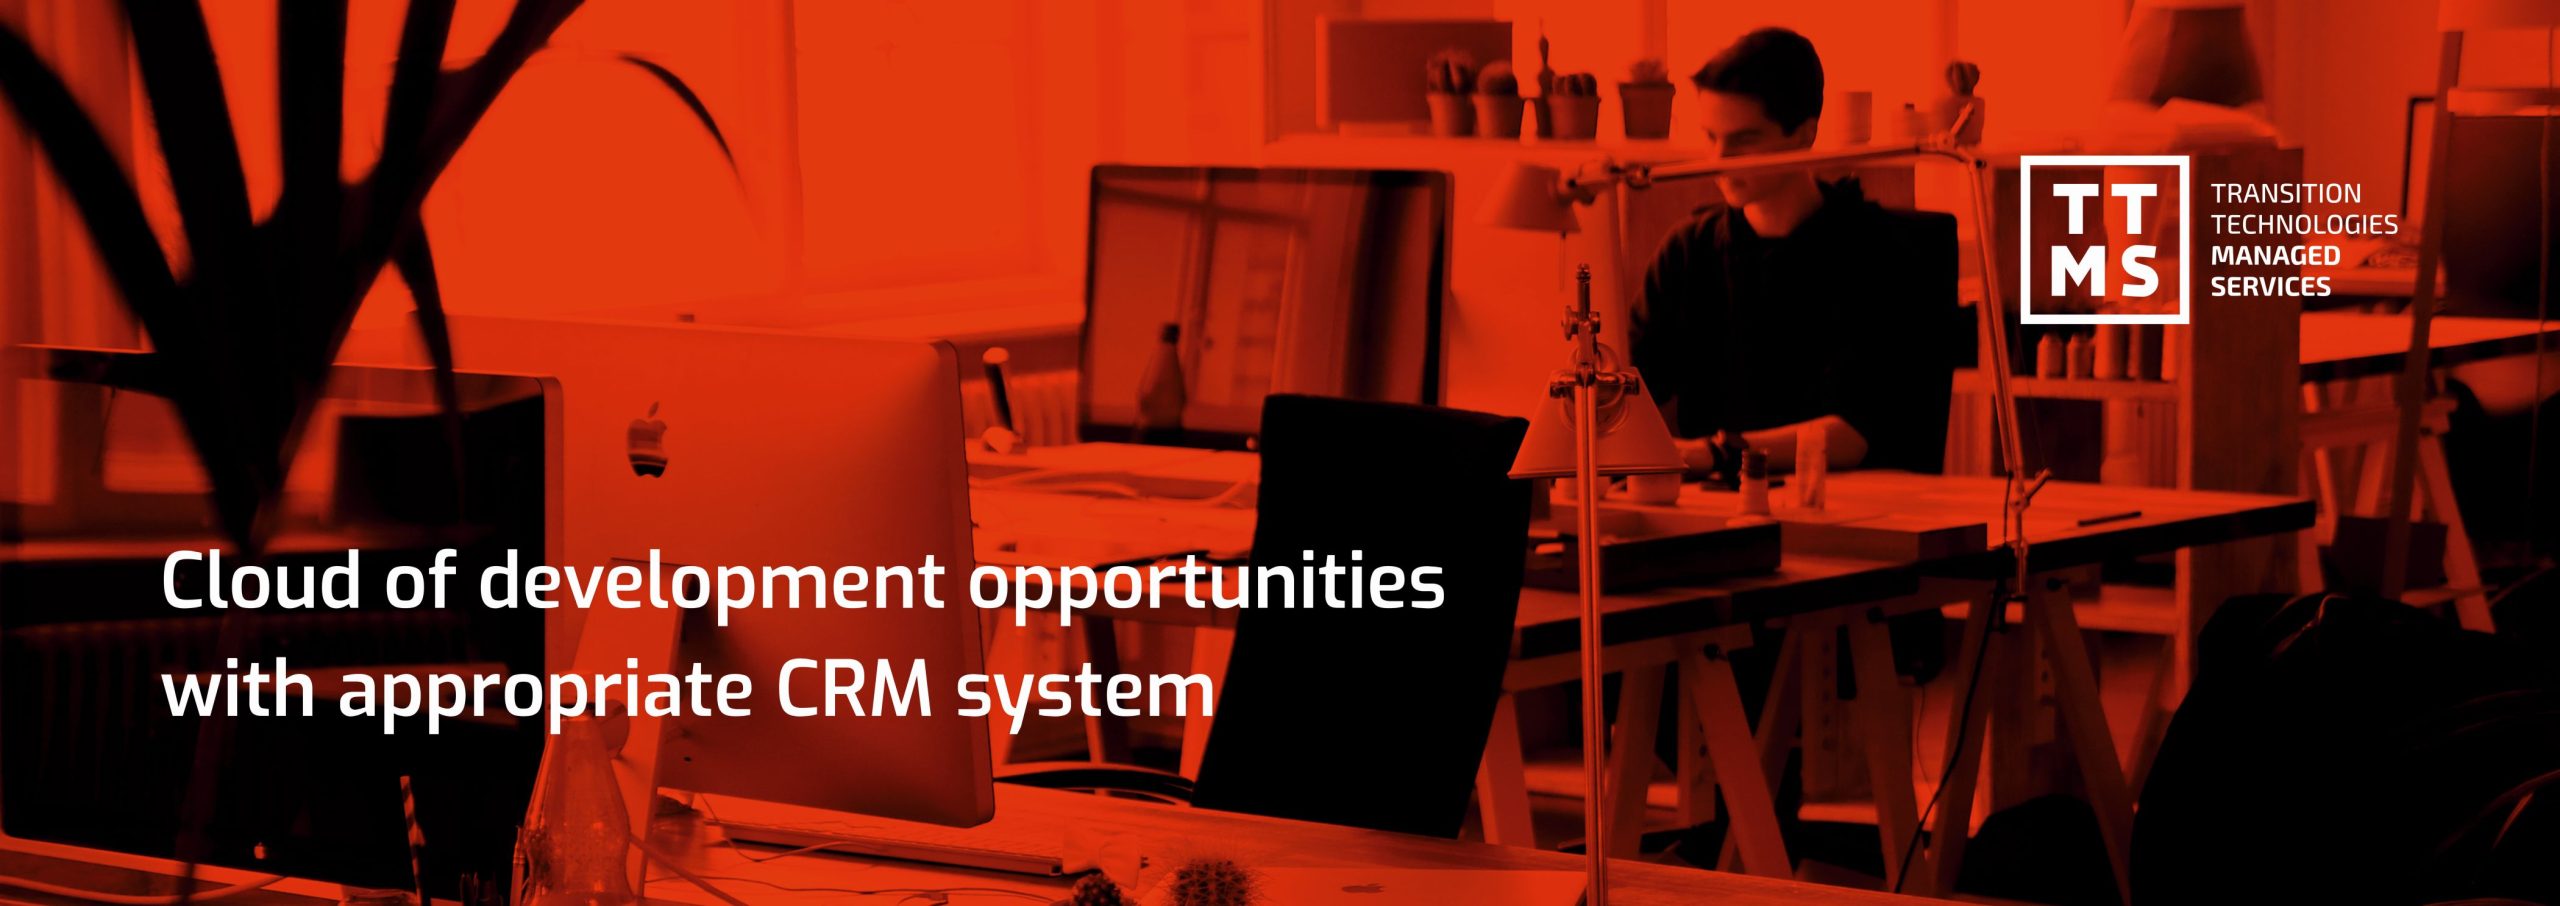 Cloud of development opportunities with appropriate CRM system